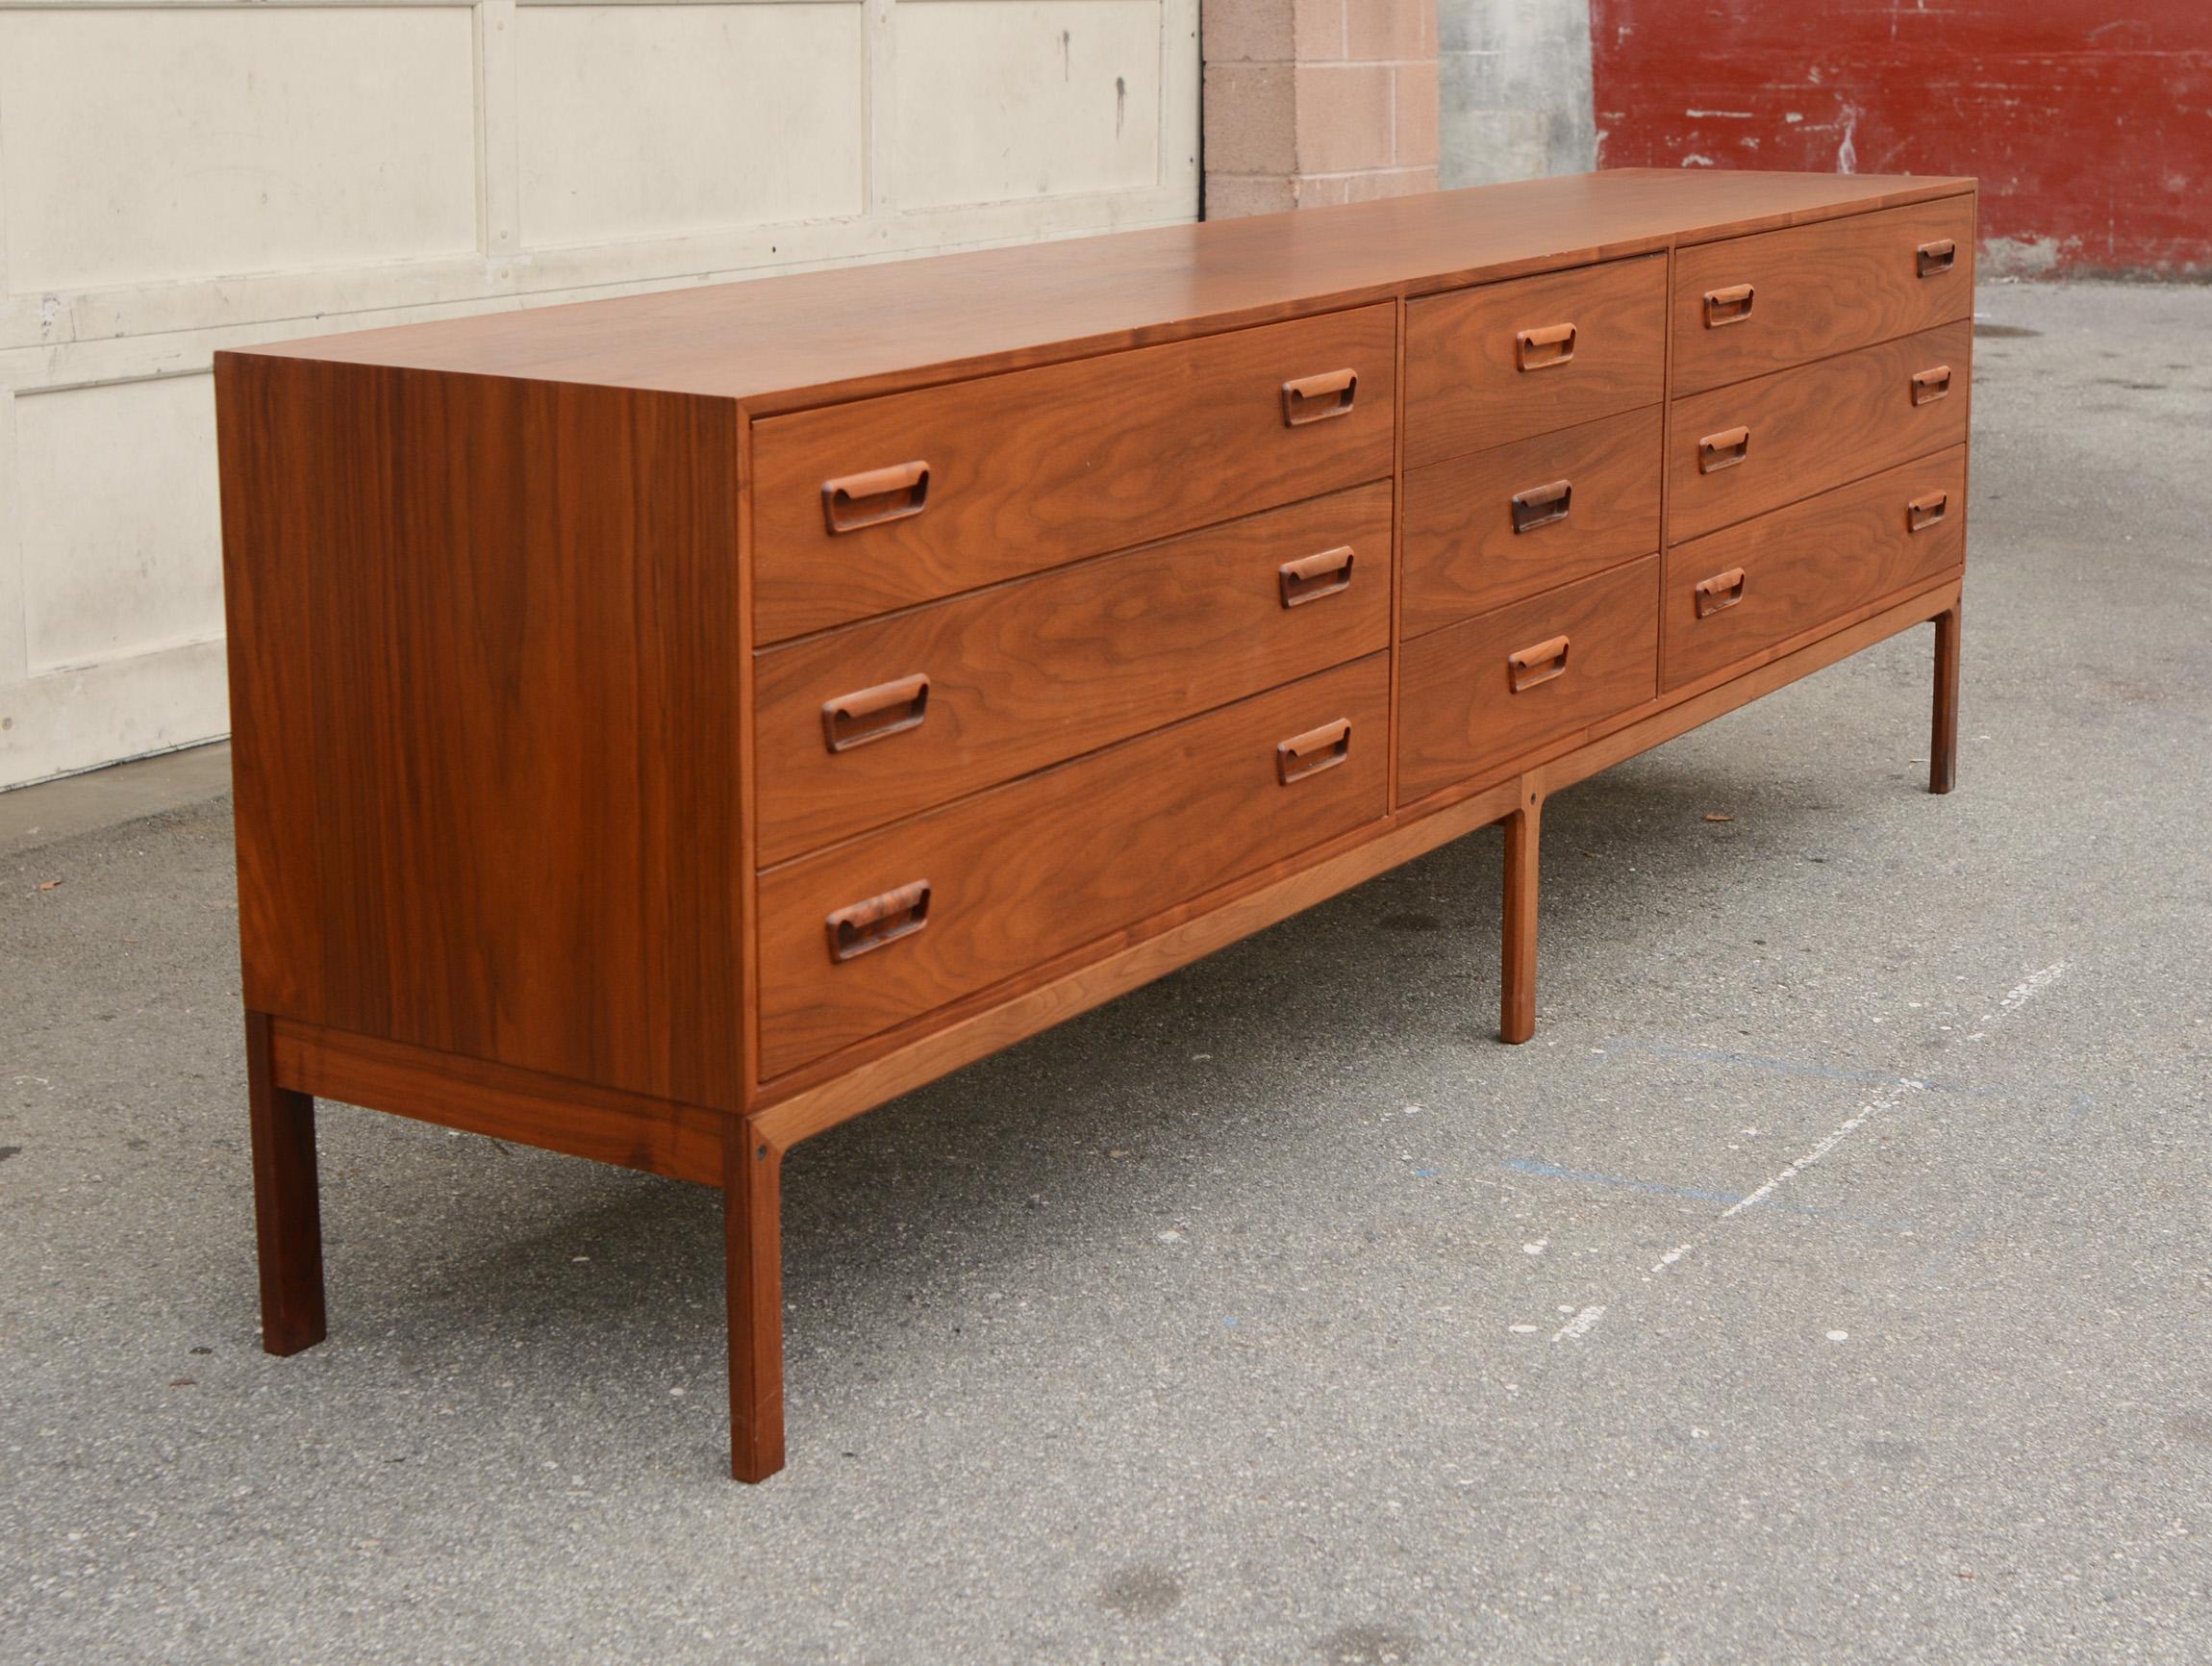 Long triple chest of drawers by Arne Wahl Iverson for Vinde Mobelfrabrik. This has a tremendous amount of storage for a los chest. This chest is walnut with an outstanding grain pattern. The finish is original and in very good condition. There are a